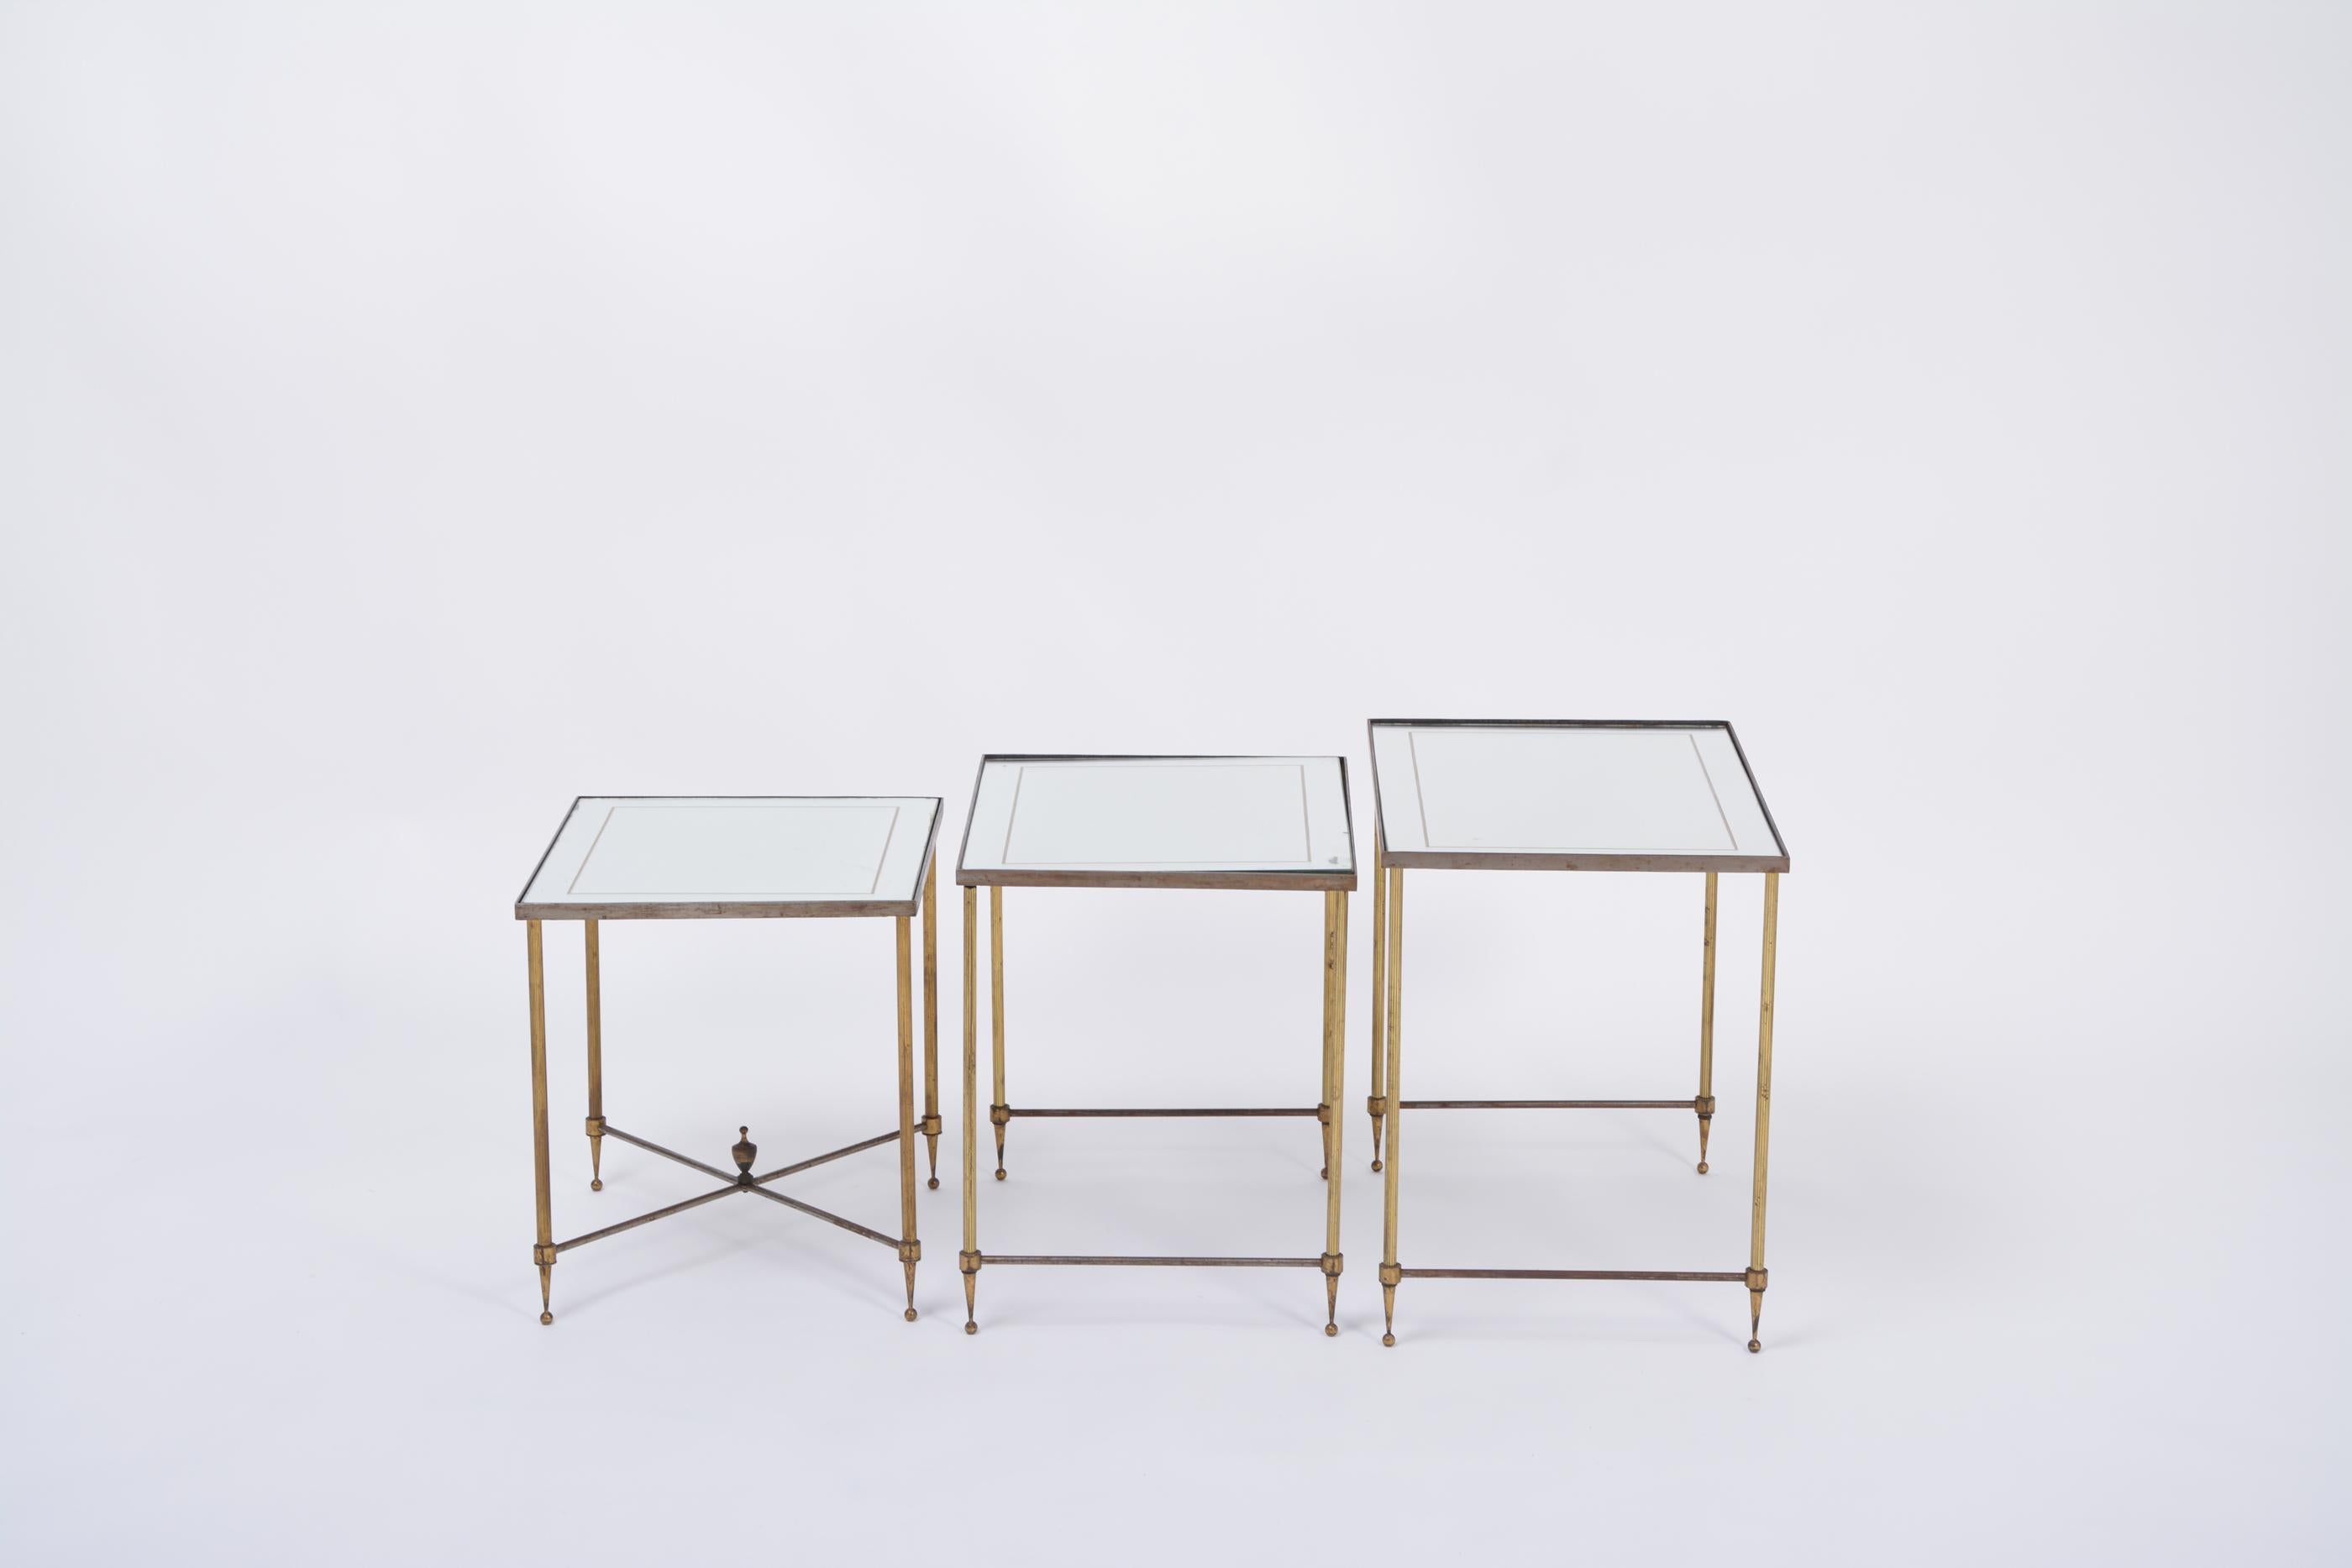 Beautiful set of three Italian Maison Jansen style nesting tables with neo classical features. The tables are made of metal and feature mirrored tops with beautiful patina. Each table is supported by four thin and elegant reeded legs, raised on